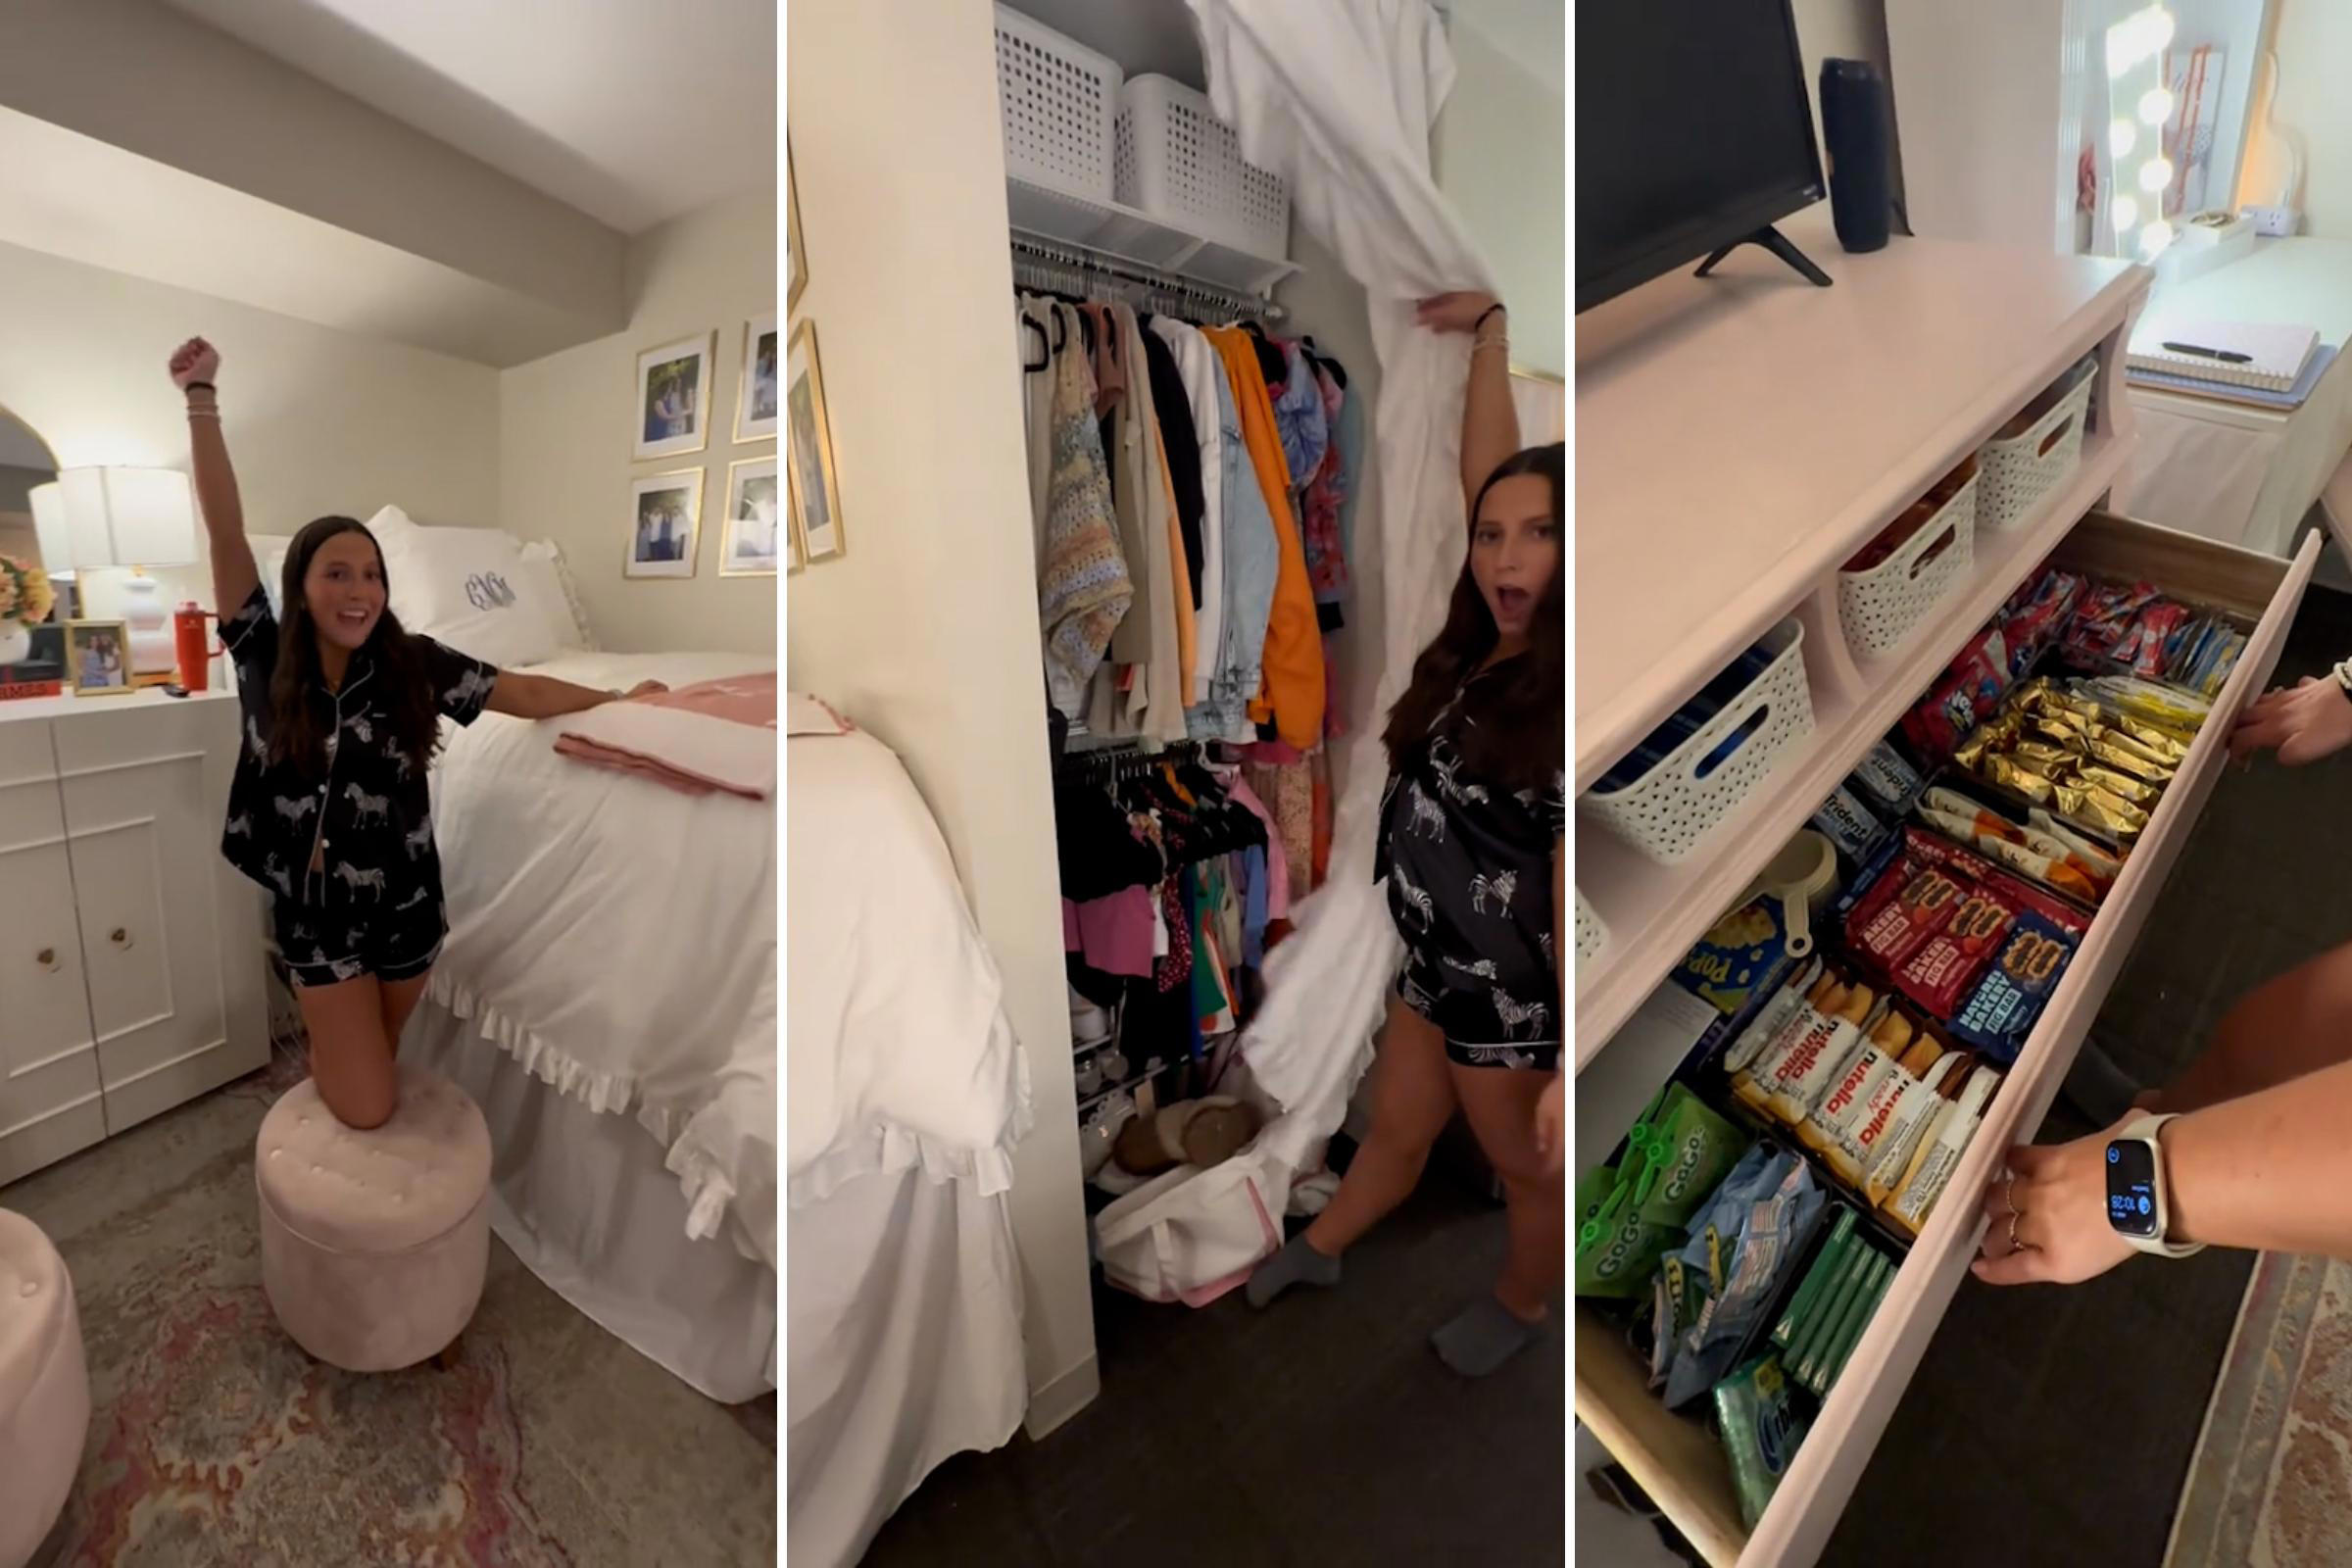 College Students Stun Internet With Luxury Dorm Tour: 'Can Only Dream'